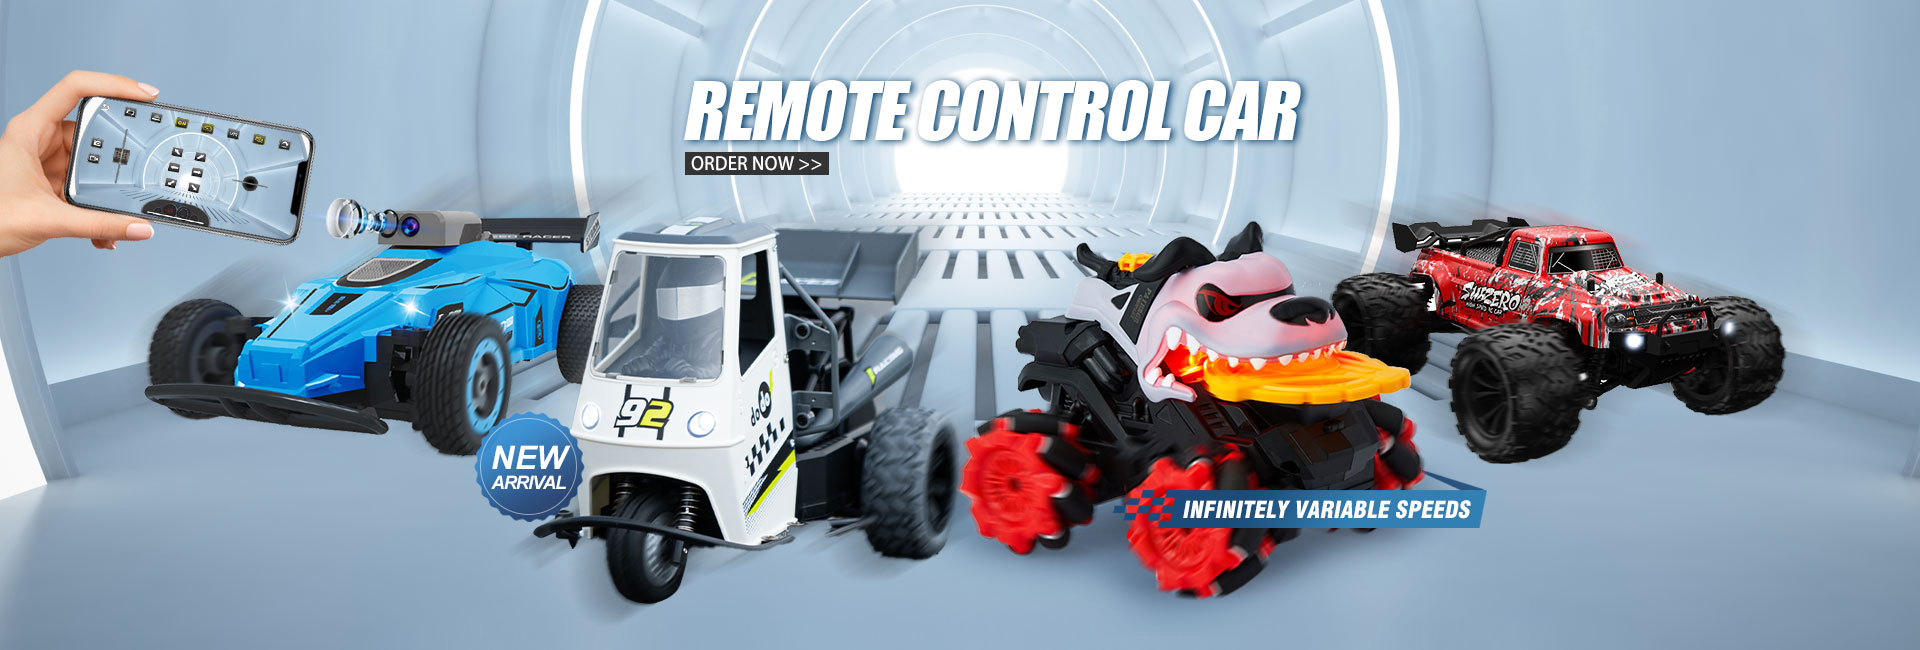 new style rc car series banner